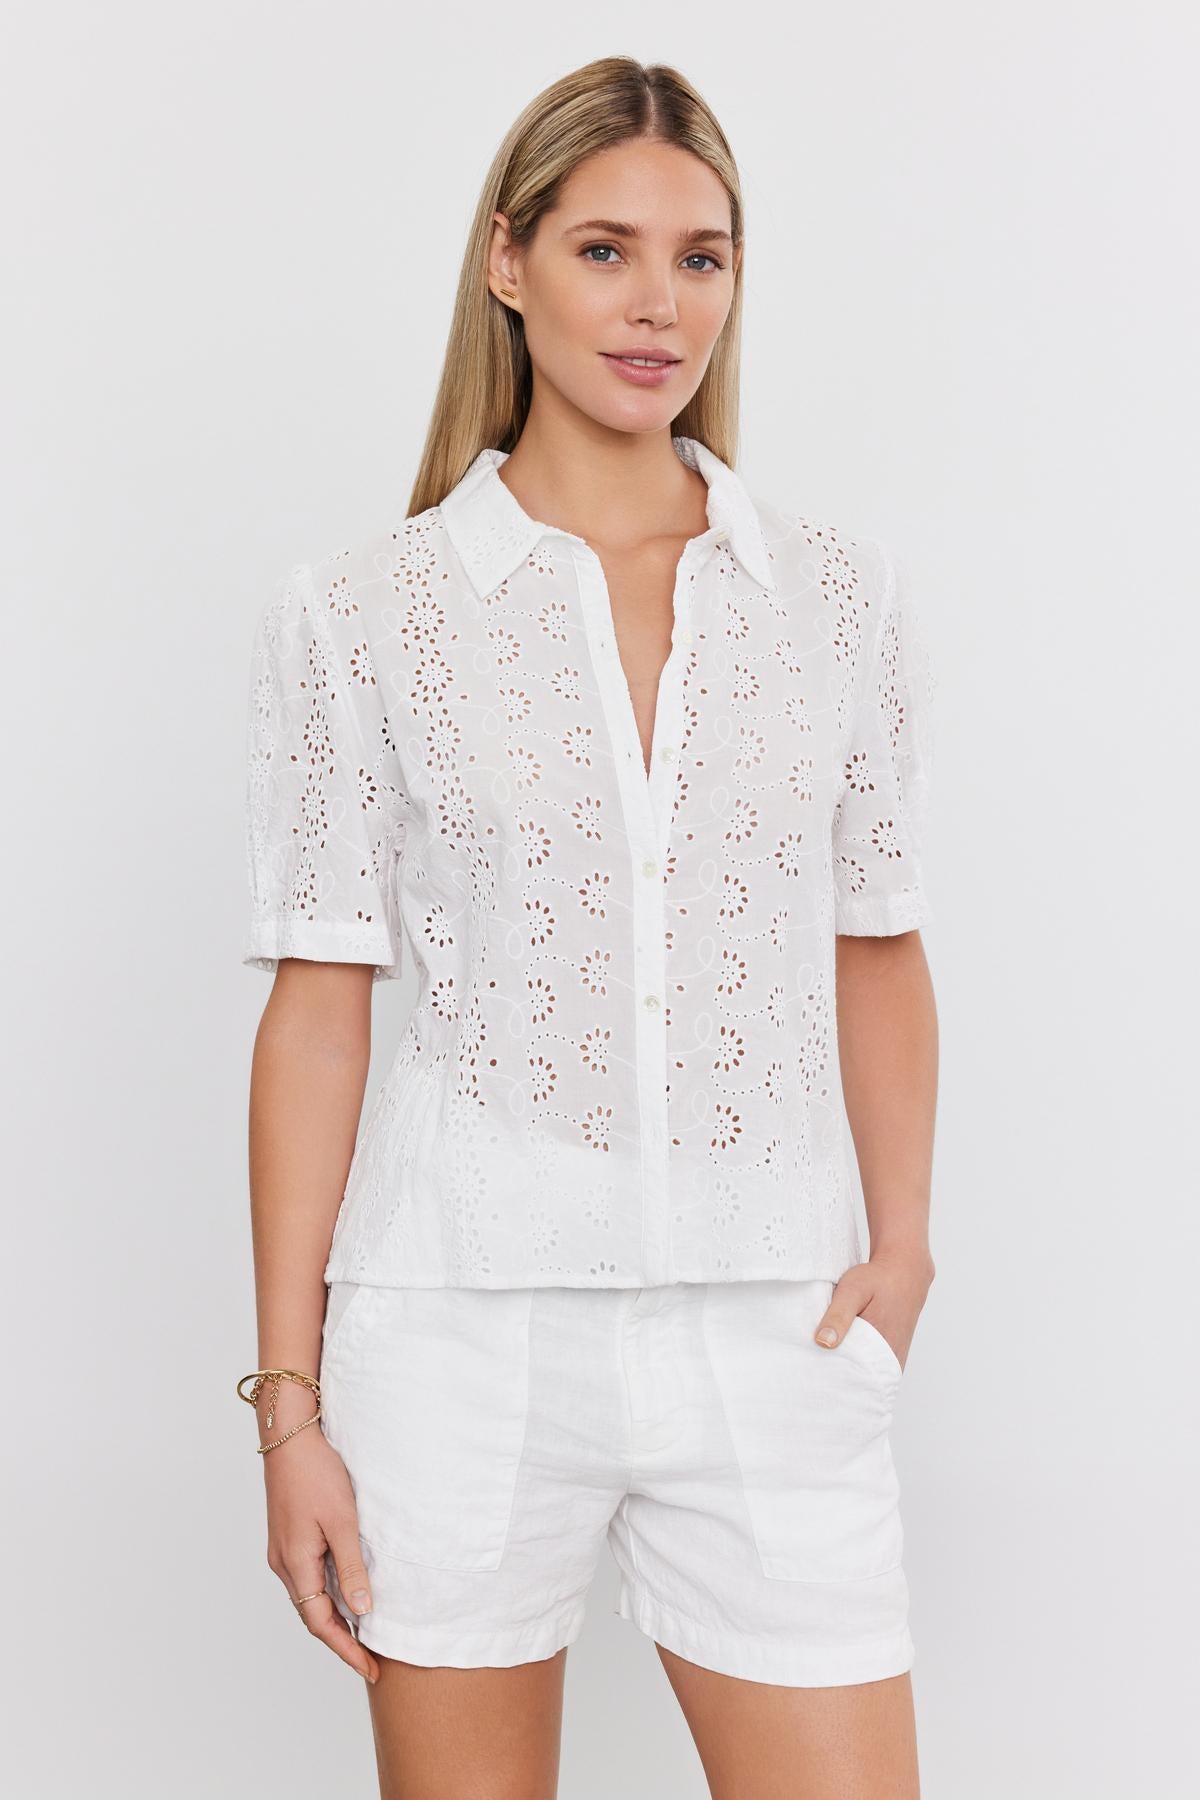 Woman wearing a white cotton OLIVIA BLOUSE with eyelet details and matching shorts standing against a plain background. (Velvet by Graham & Spencer)-36918784852161